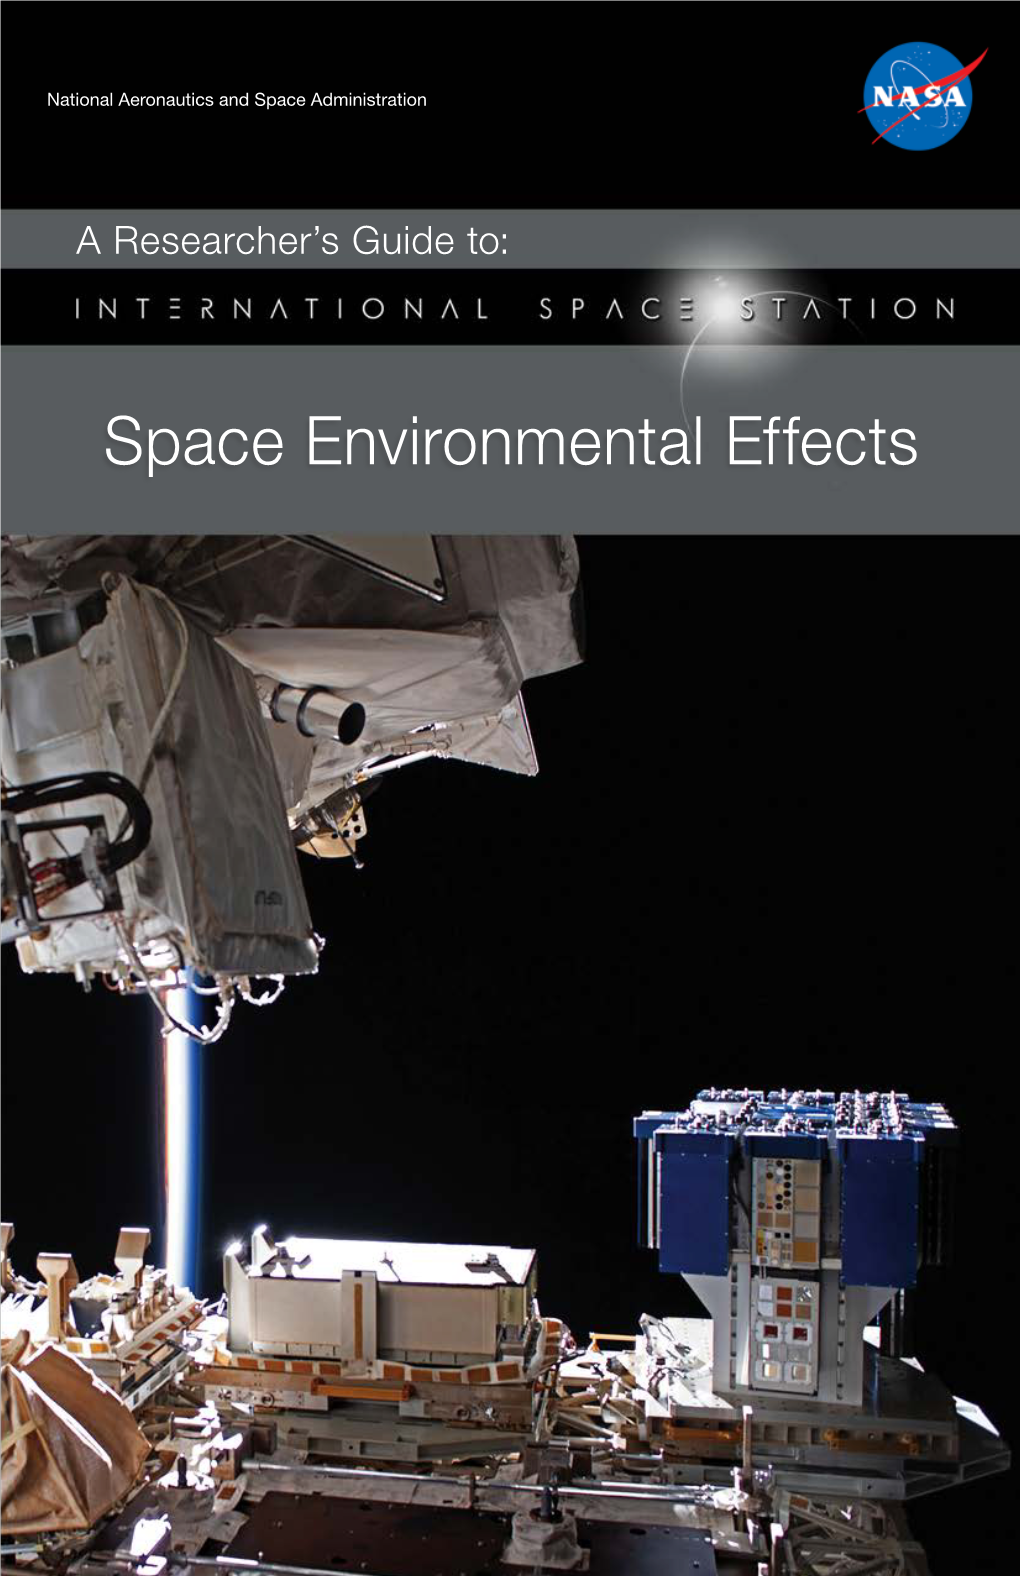 A Researcher's Guide to Space Environmental Effects